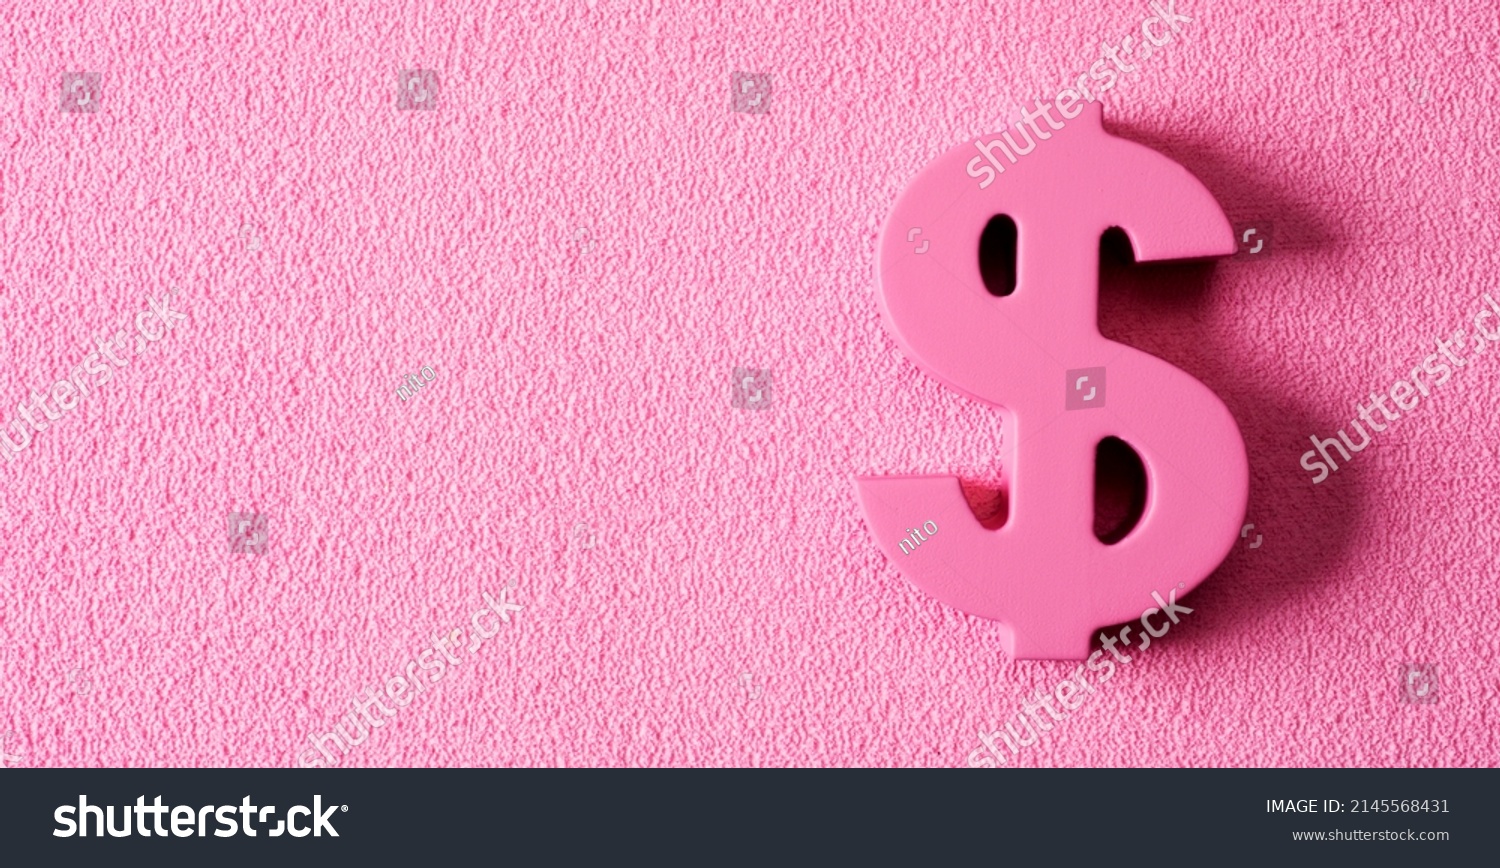 a pink dollar sign, depicting concepts such as pink money or pink capitalism, on a textured pink background with some blank space on the left #2145568431